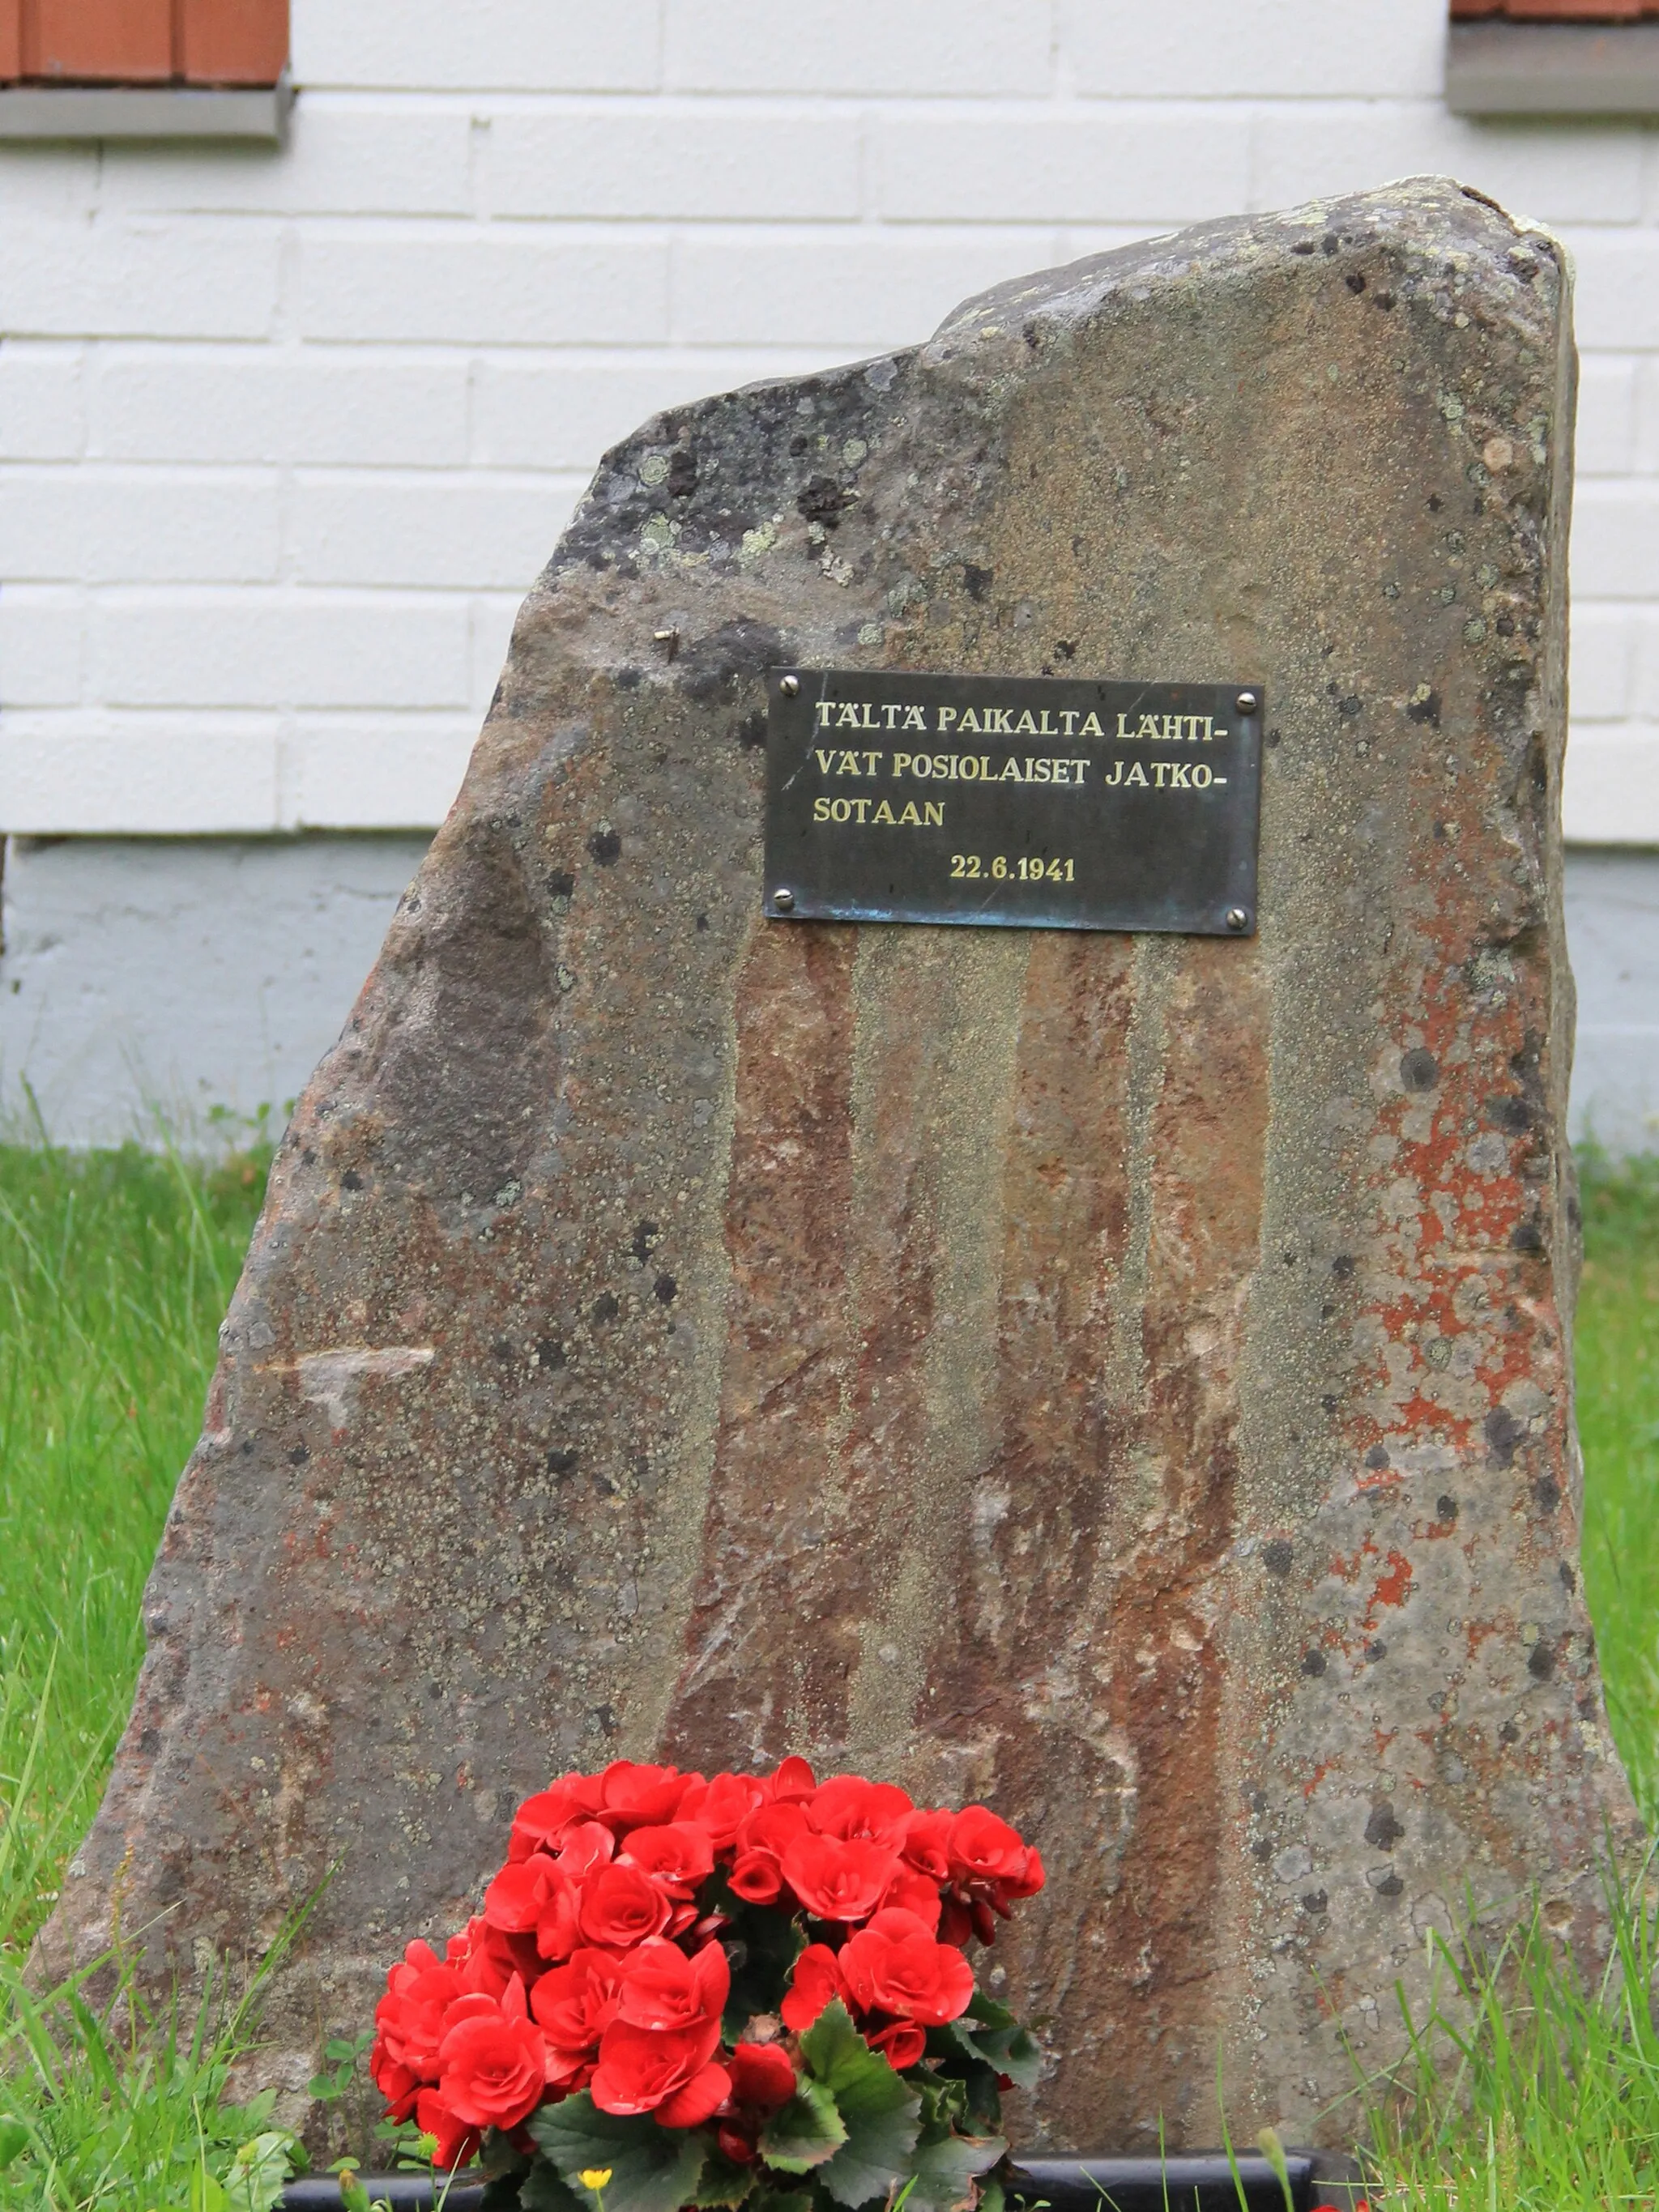 Photo showing: Memorial of going to Continuation War, in front of Parish center, Posio, Finland. - Memorial was unveiled in 1981.